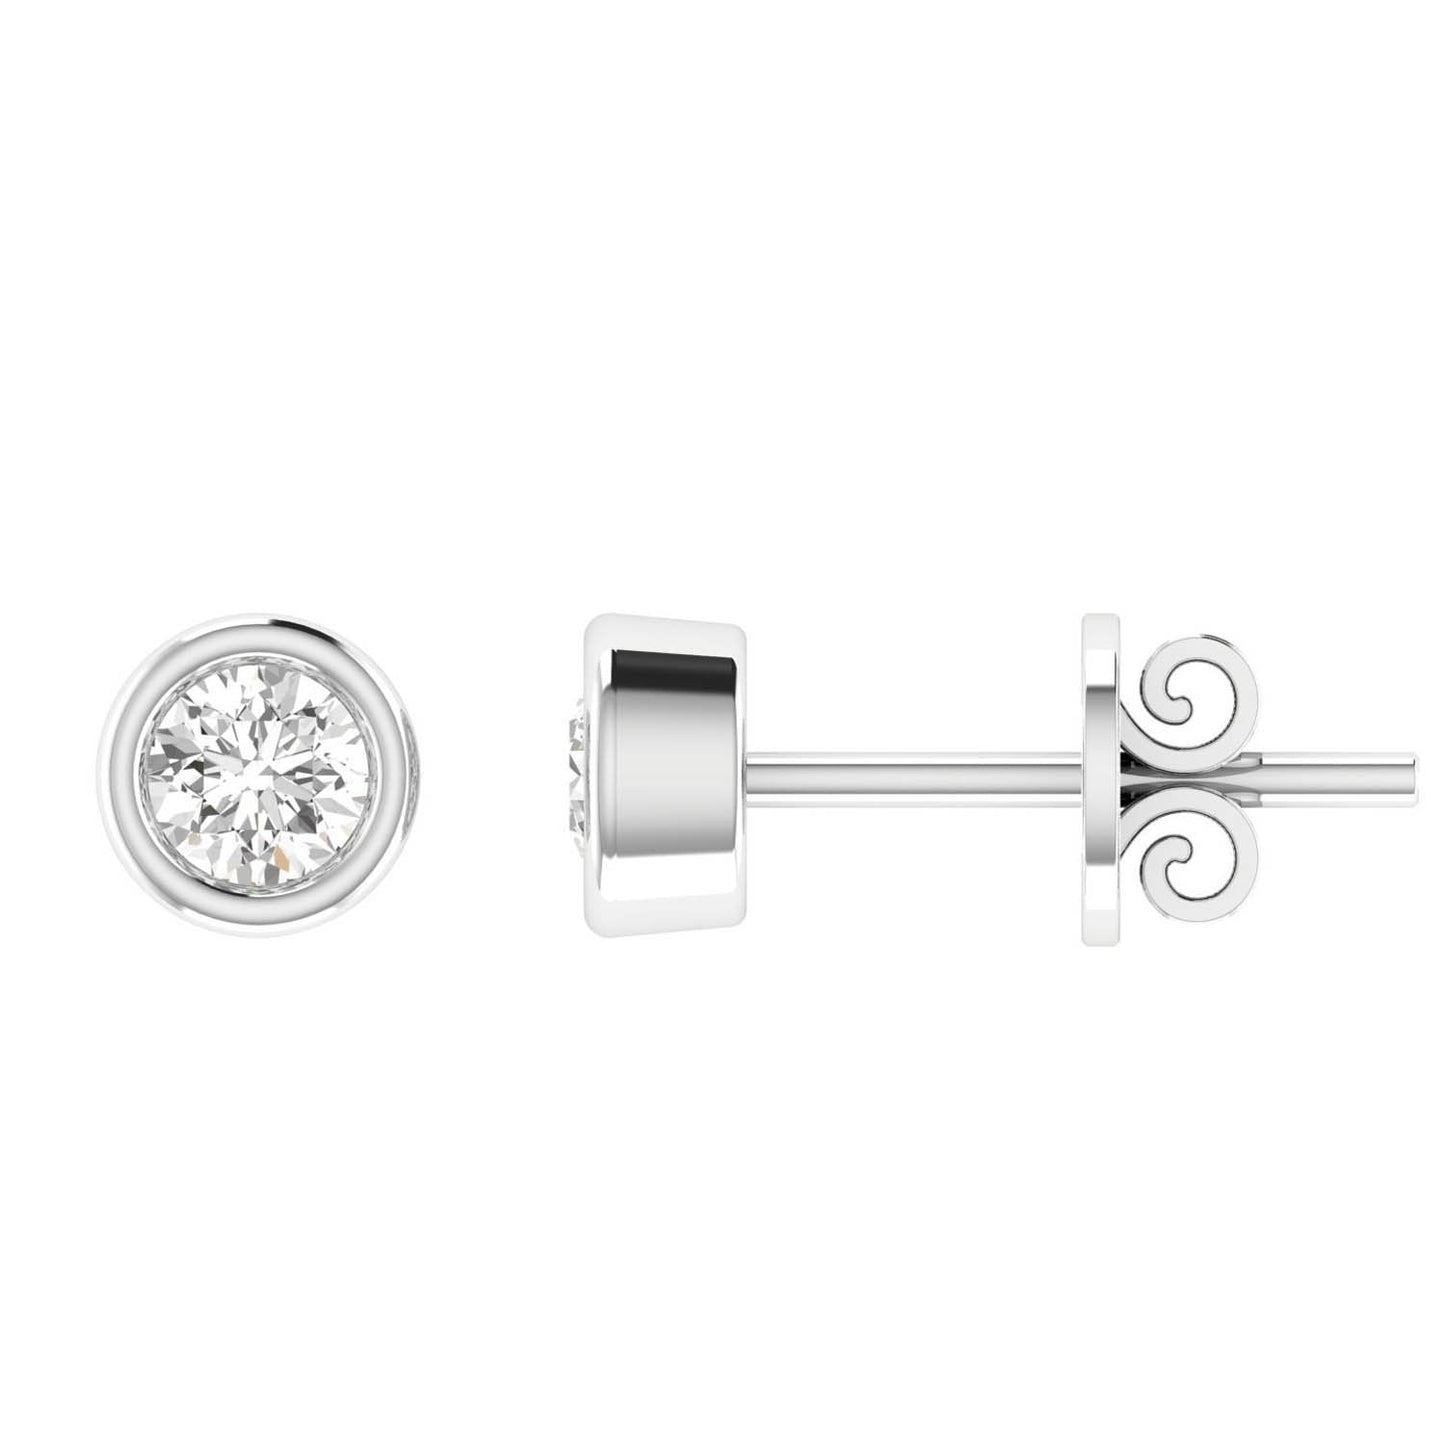 Diamond Stud Earrings with 0.40ct Diamonds in 18K White Gold - 18WBE40